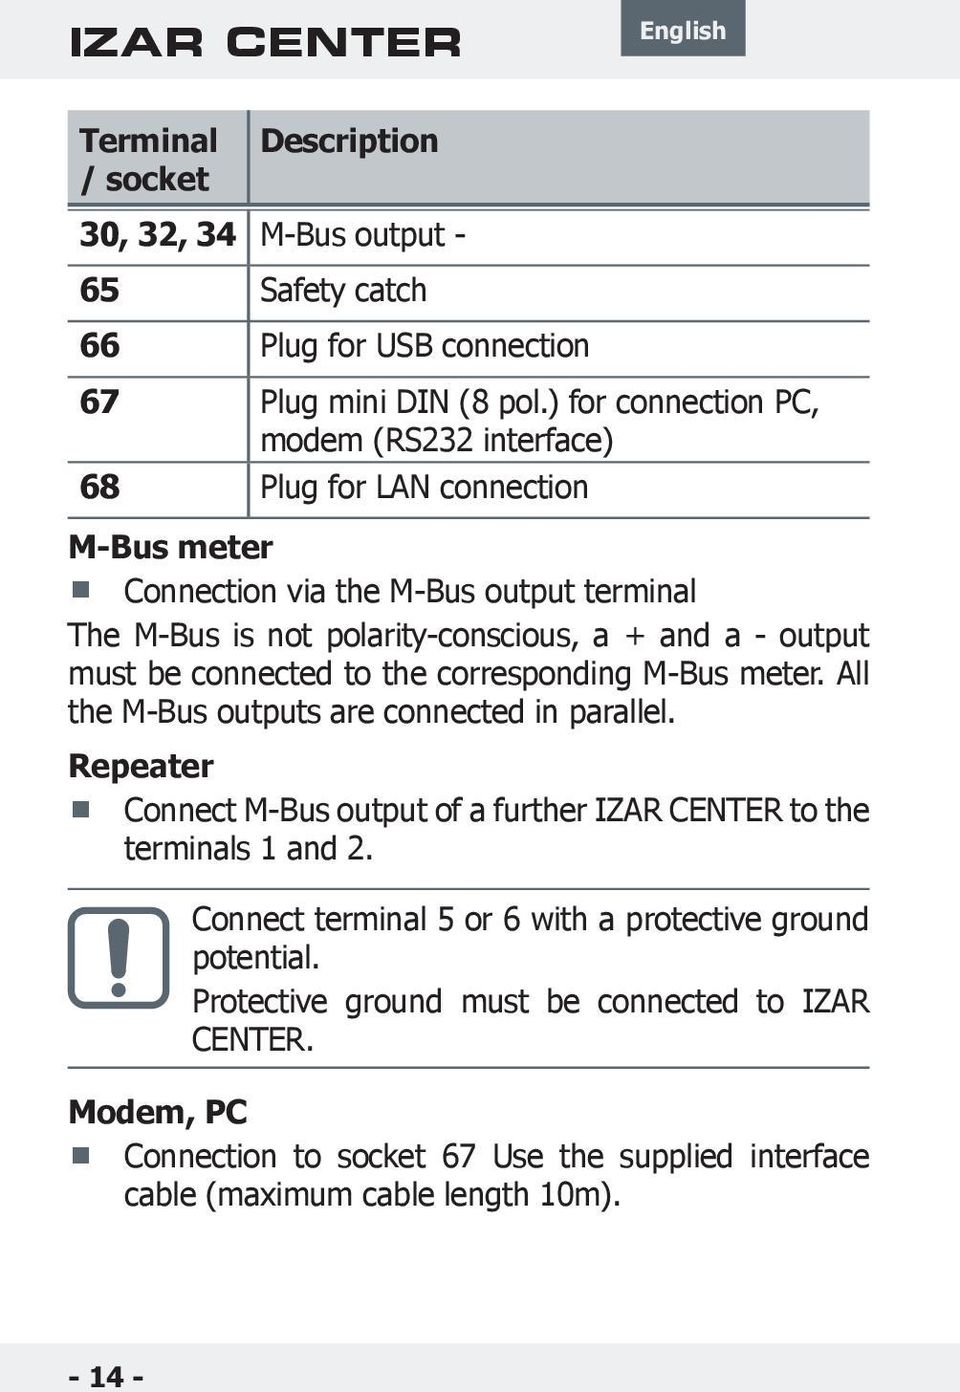 output must be connected to the corresponding M-Bus meter. All the M-Bus outputs are connected in parallel. Repeater Connect M-Bus output of a further to the terminals 1 and 2.